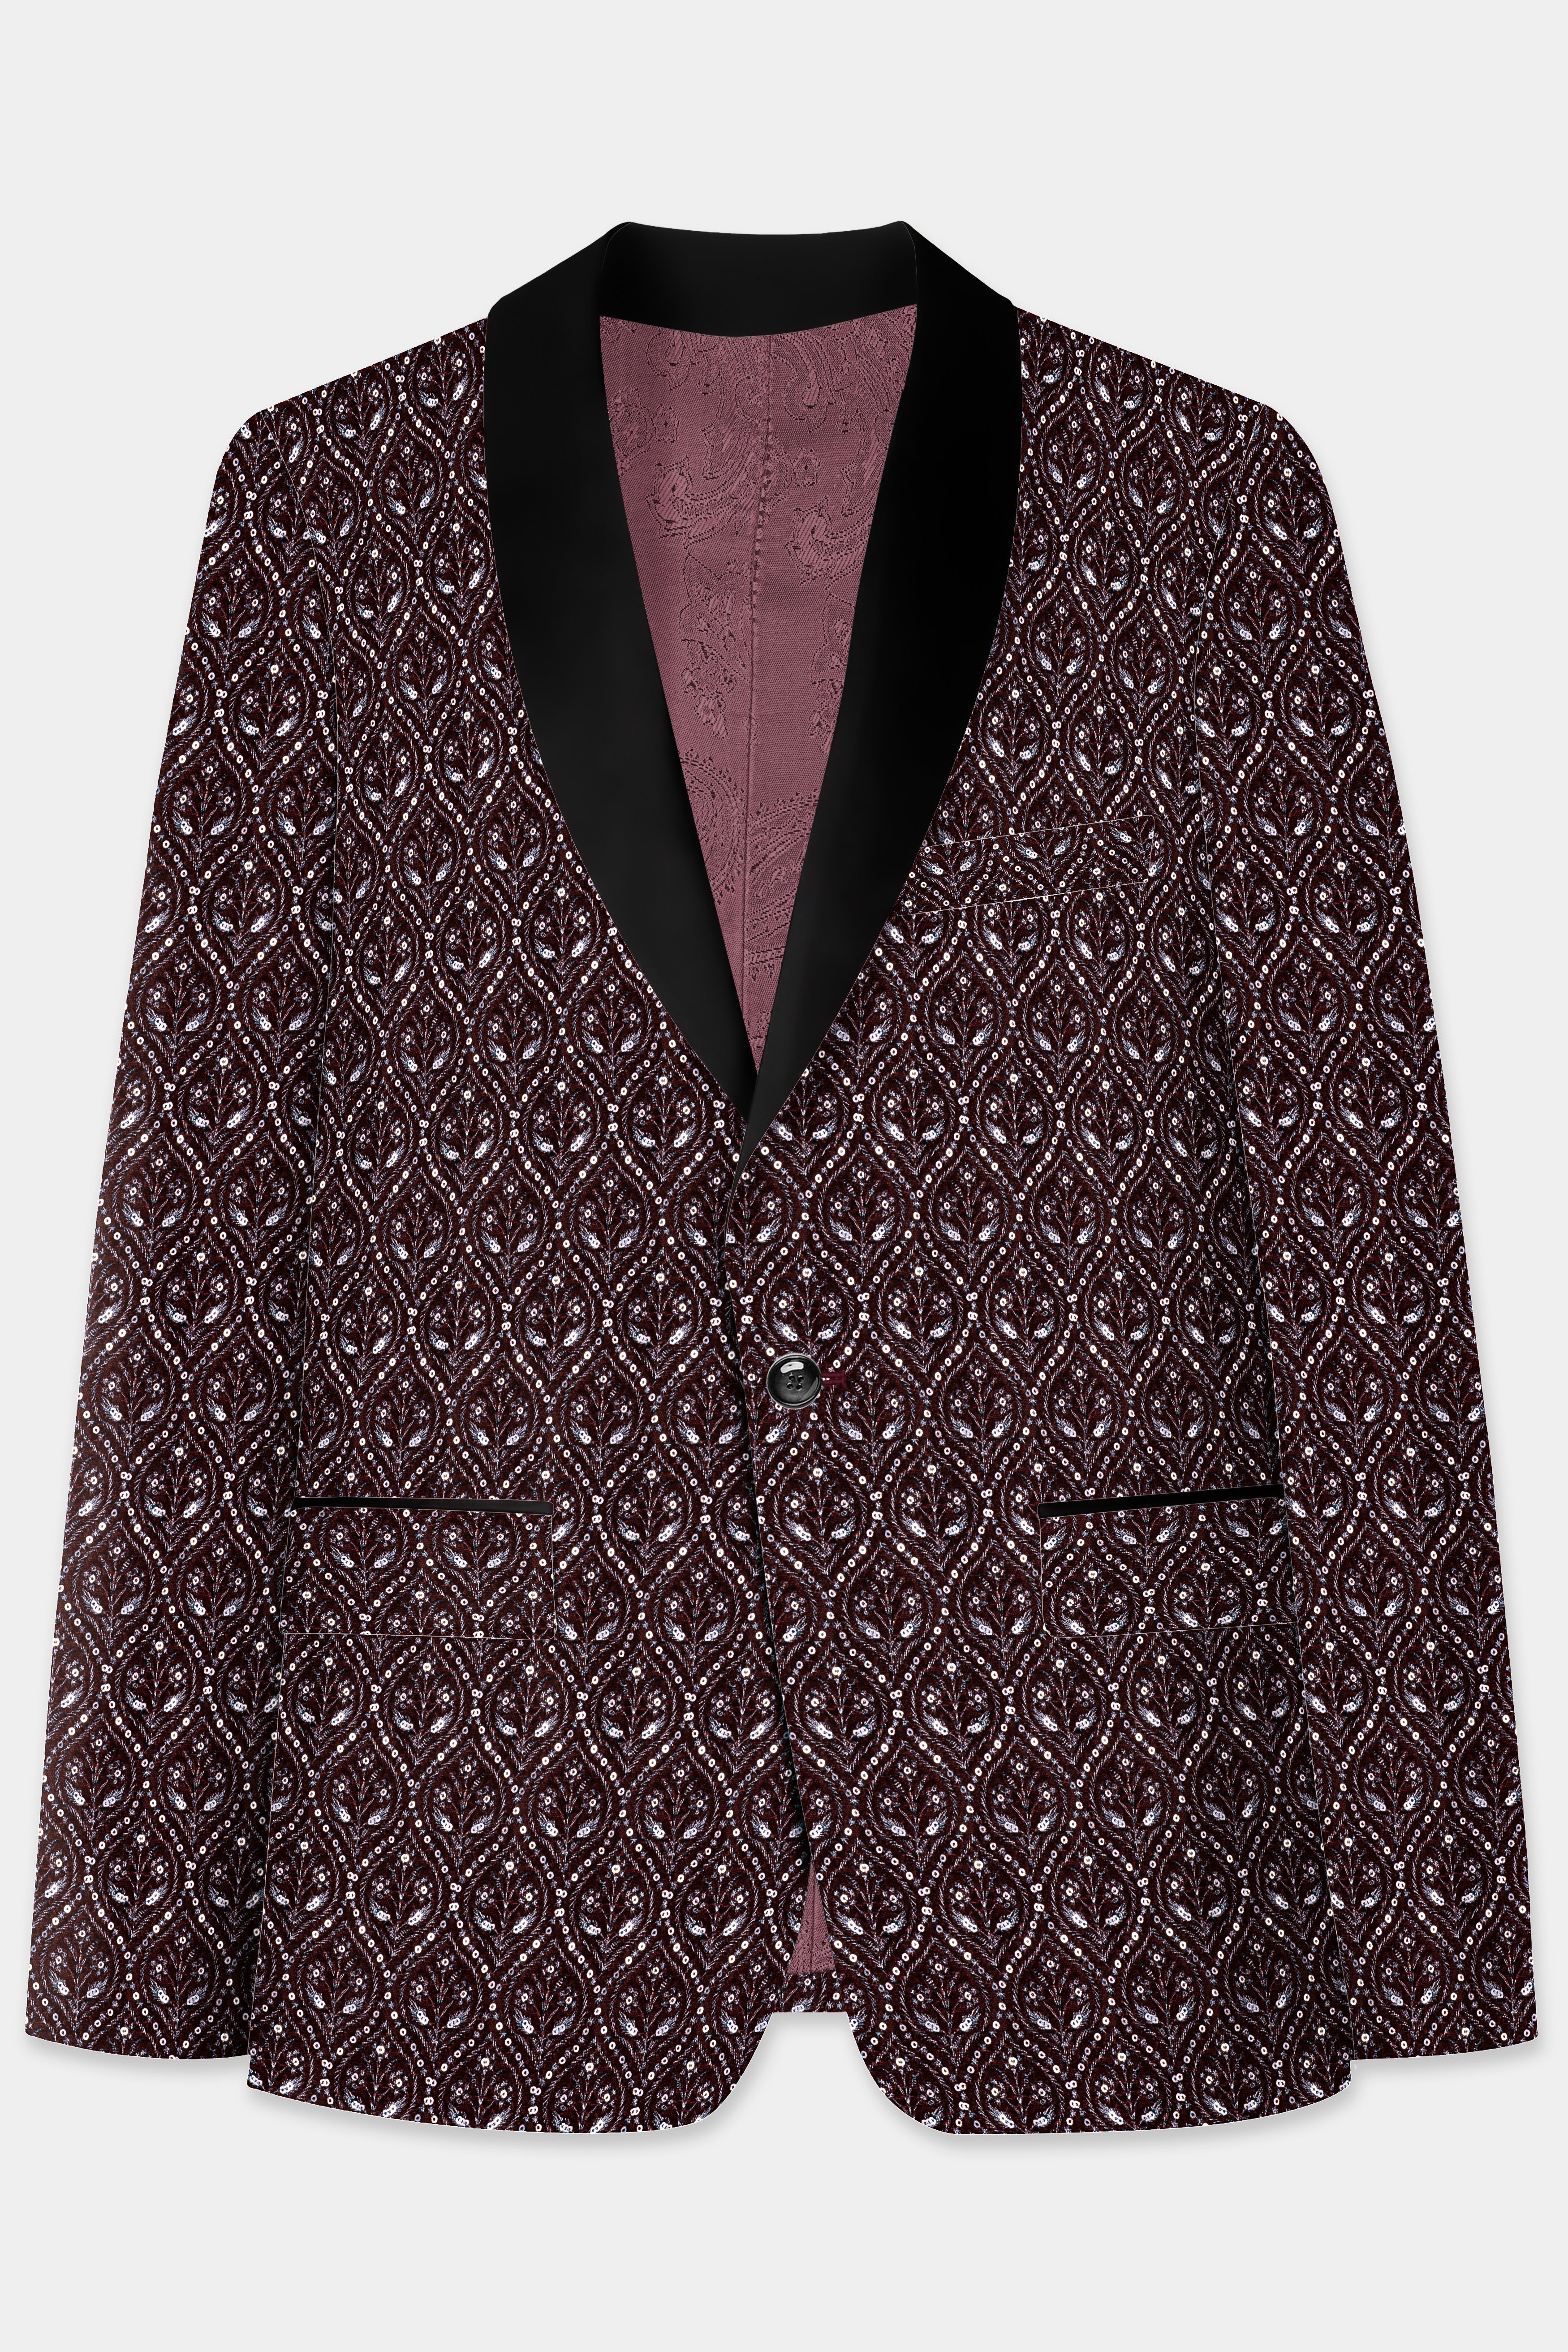 Aubergine Maroon With Sequins And Thread Embroidered Tuxedo Blazer